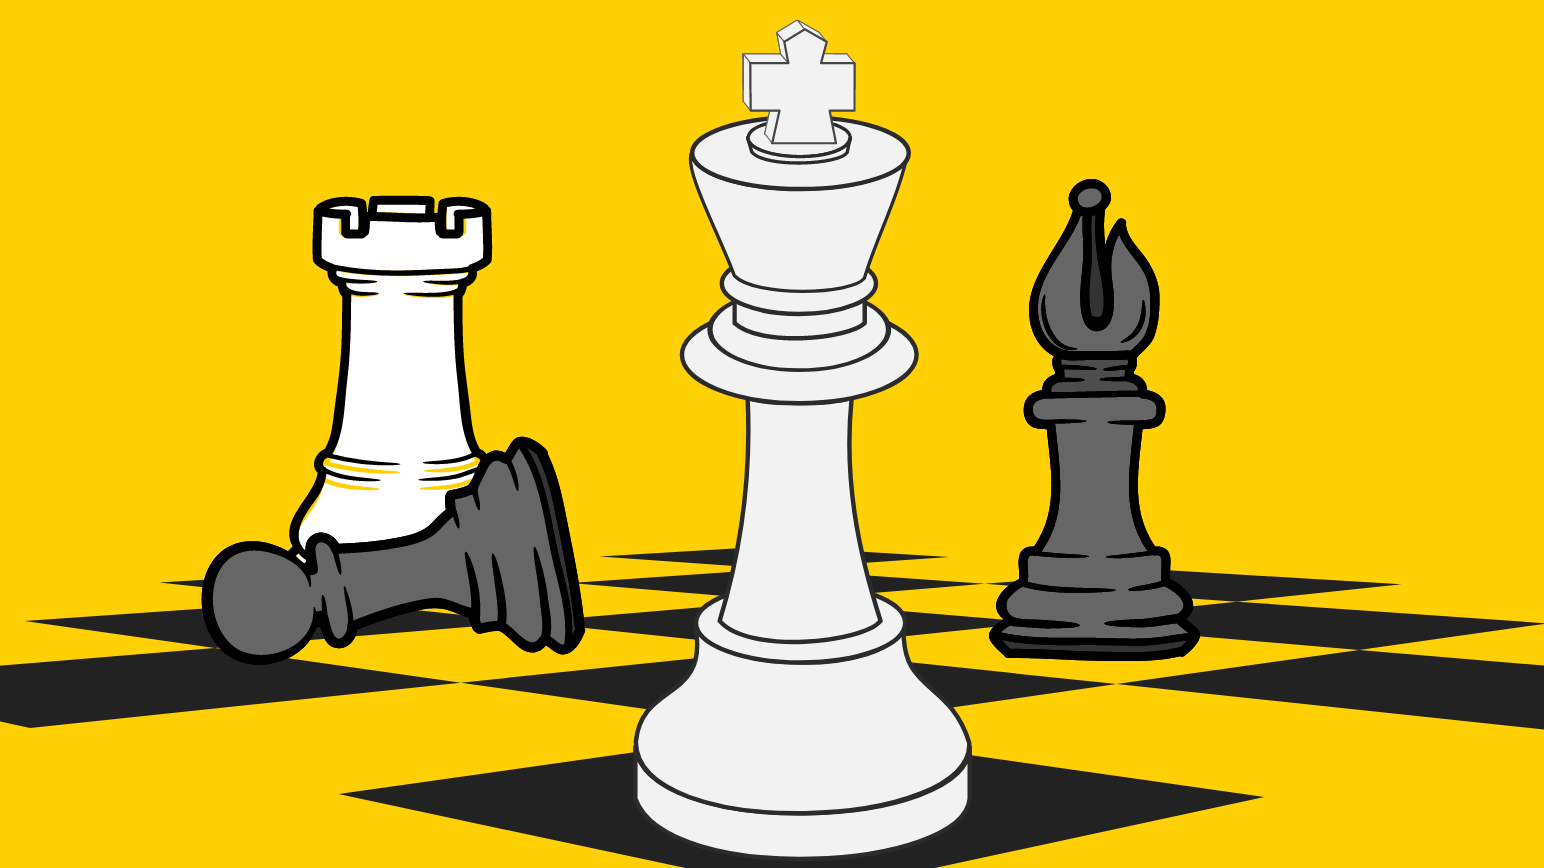 Black and white chess pieces on a dark yellow background